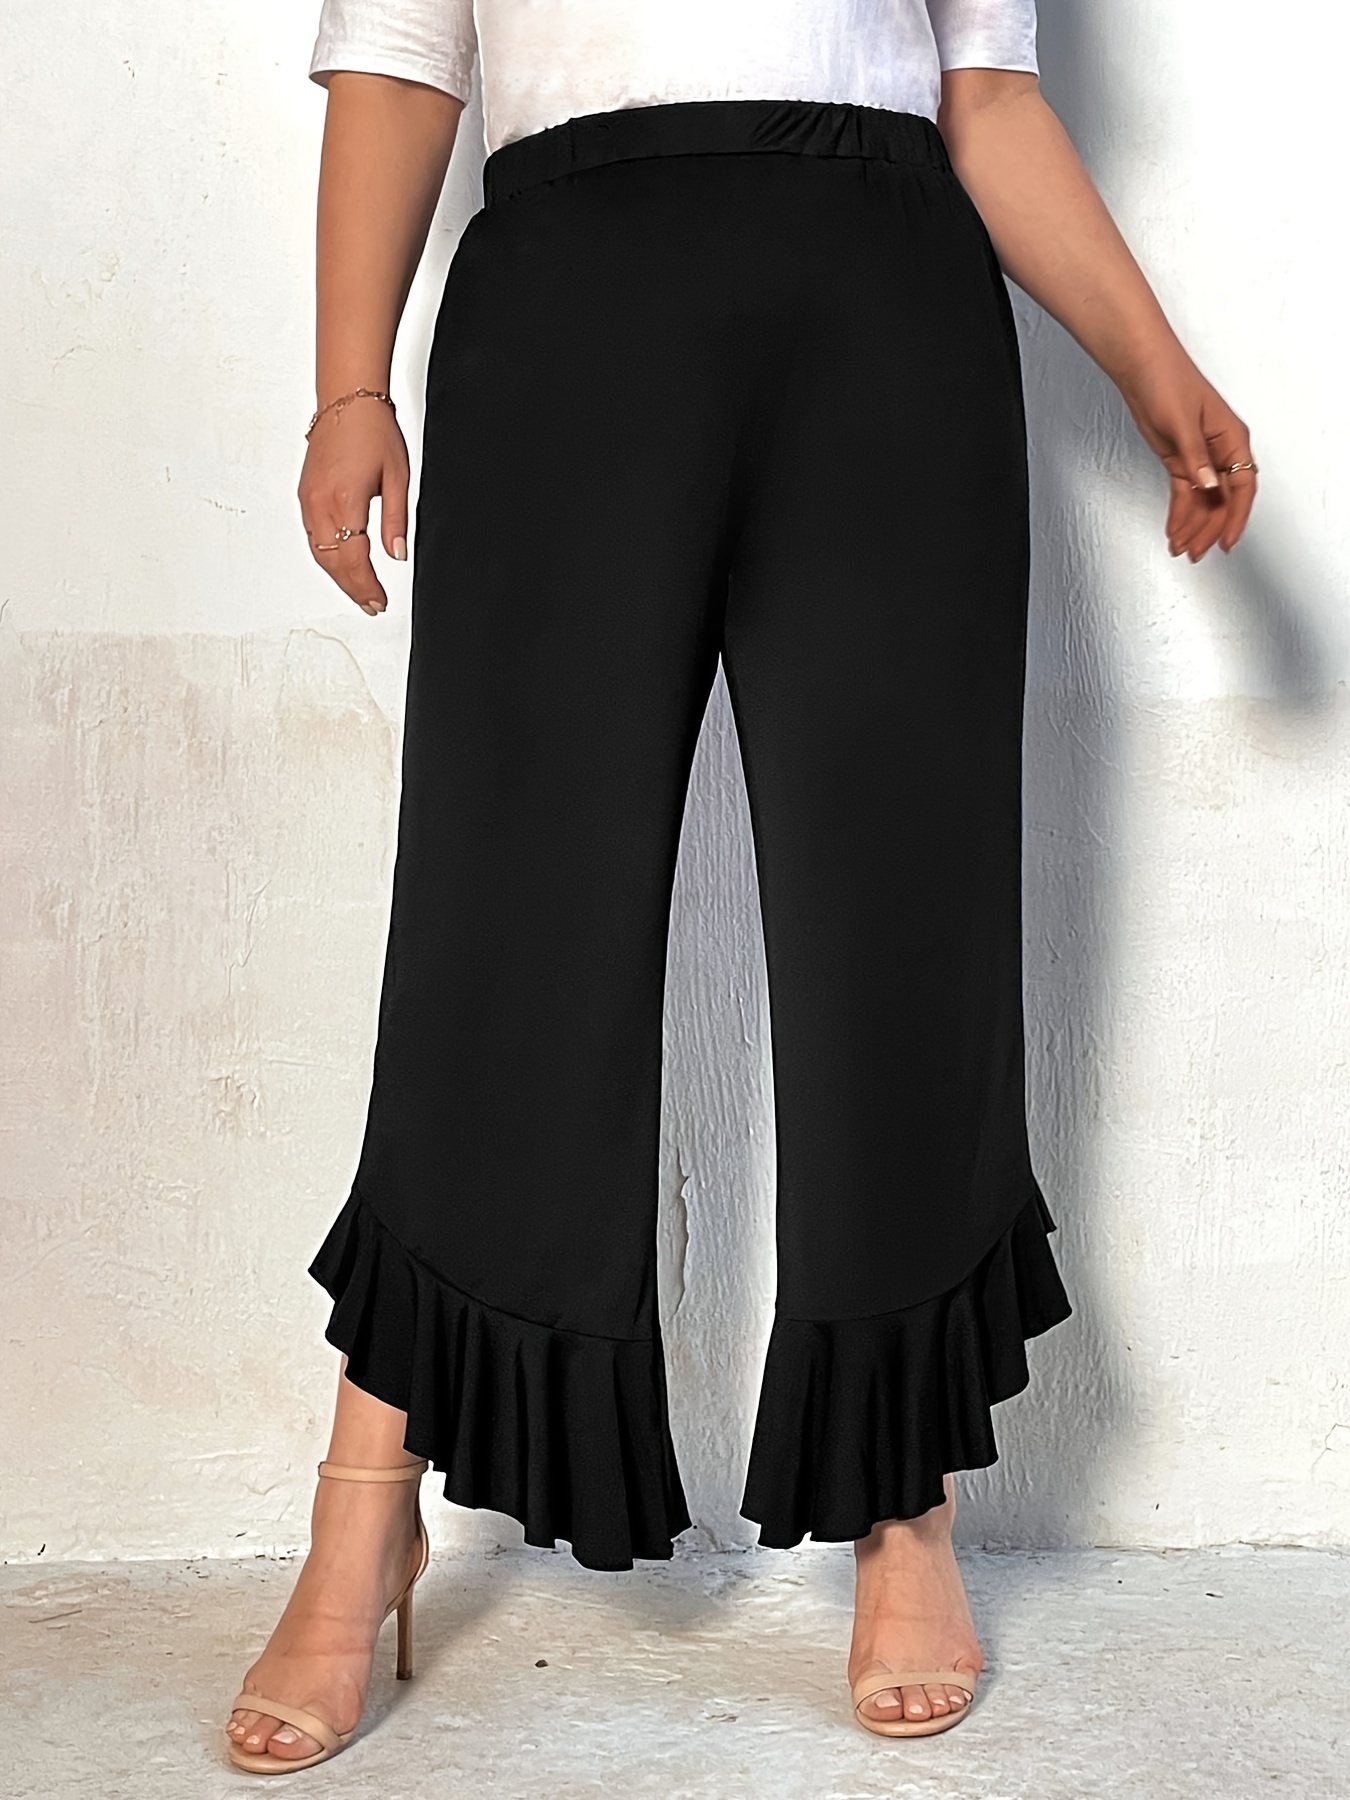 Plus Size Casual Pants, Women's Plus Solid Elastic High Rise High